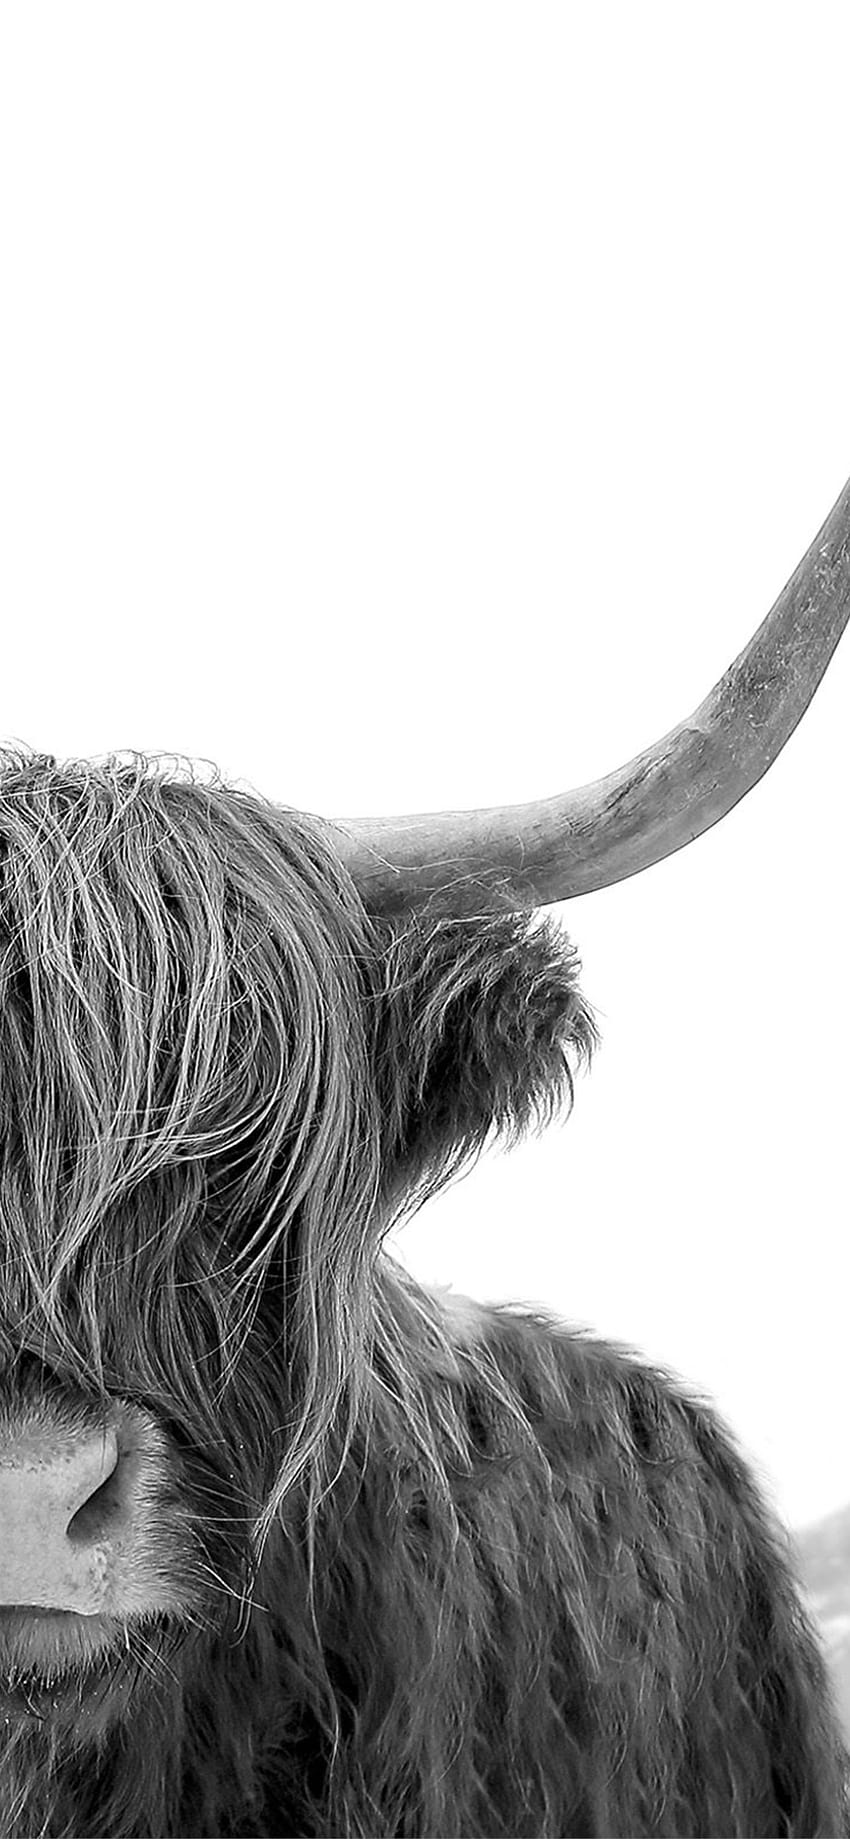 highland cow iPhone, highland cattle HD phone wallpaper